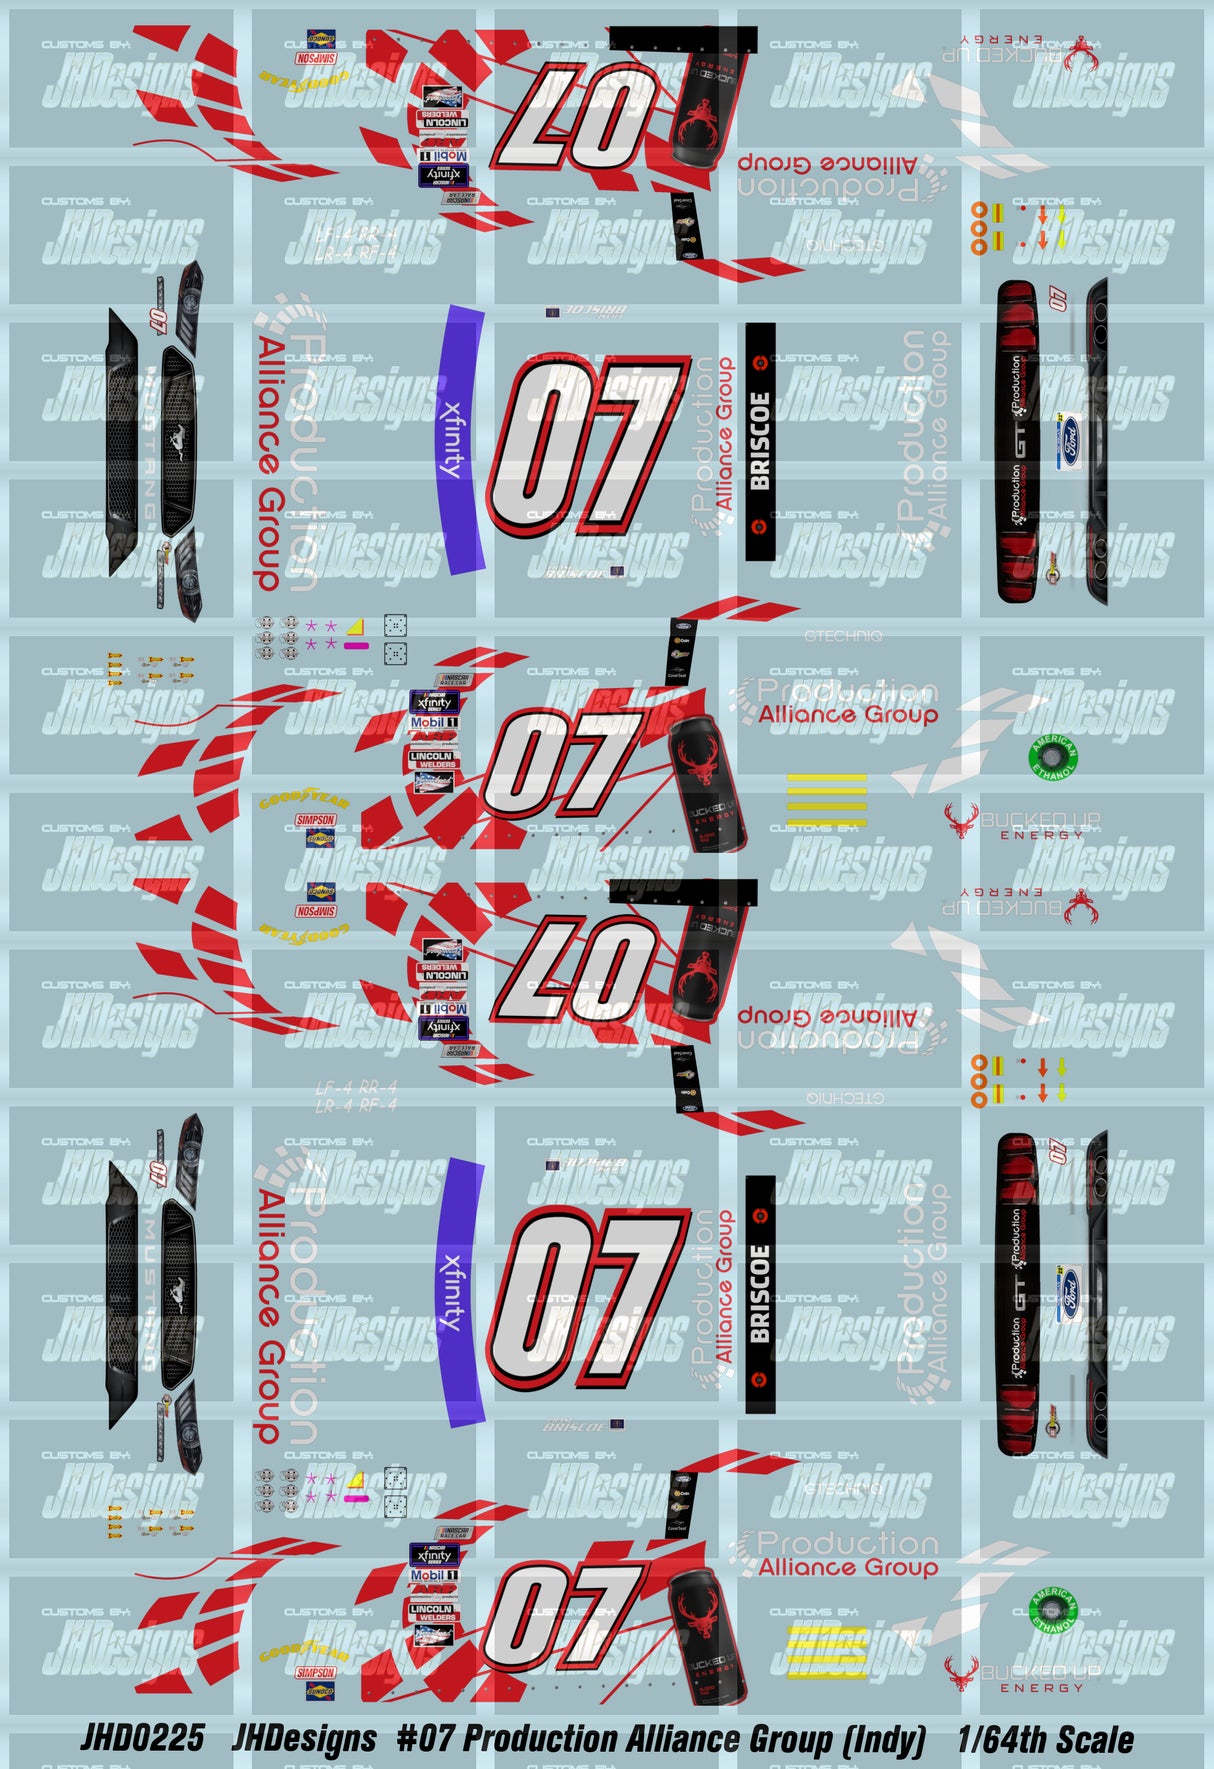 JH Designs Chase Briscoe 2022 NXS #07 Production Alliance Group (Indy Road Course Race) 1:64 Racecar Decal Set